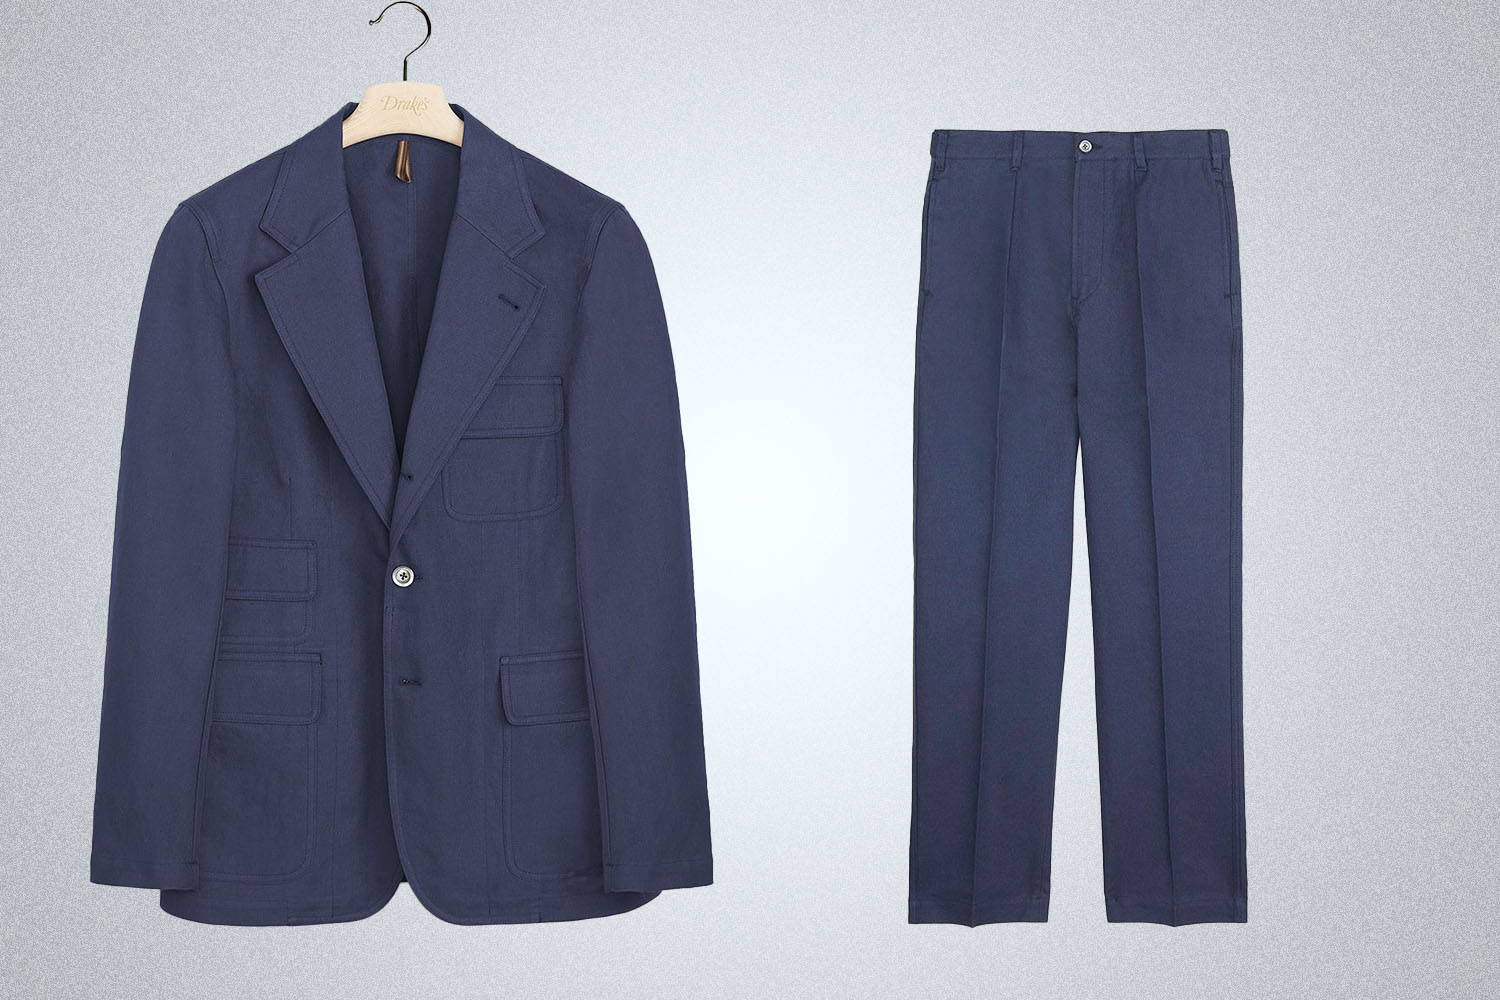 a product shot of the Drake's Hemp Game Suit on a grey background